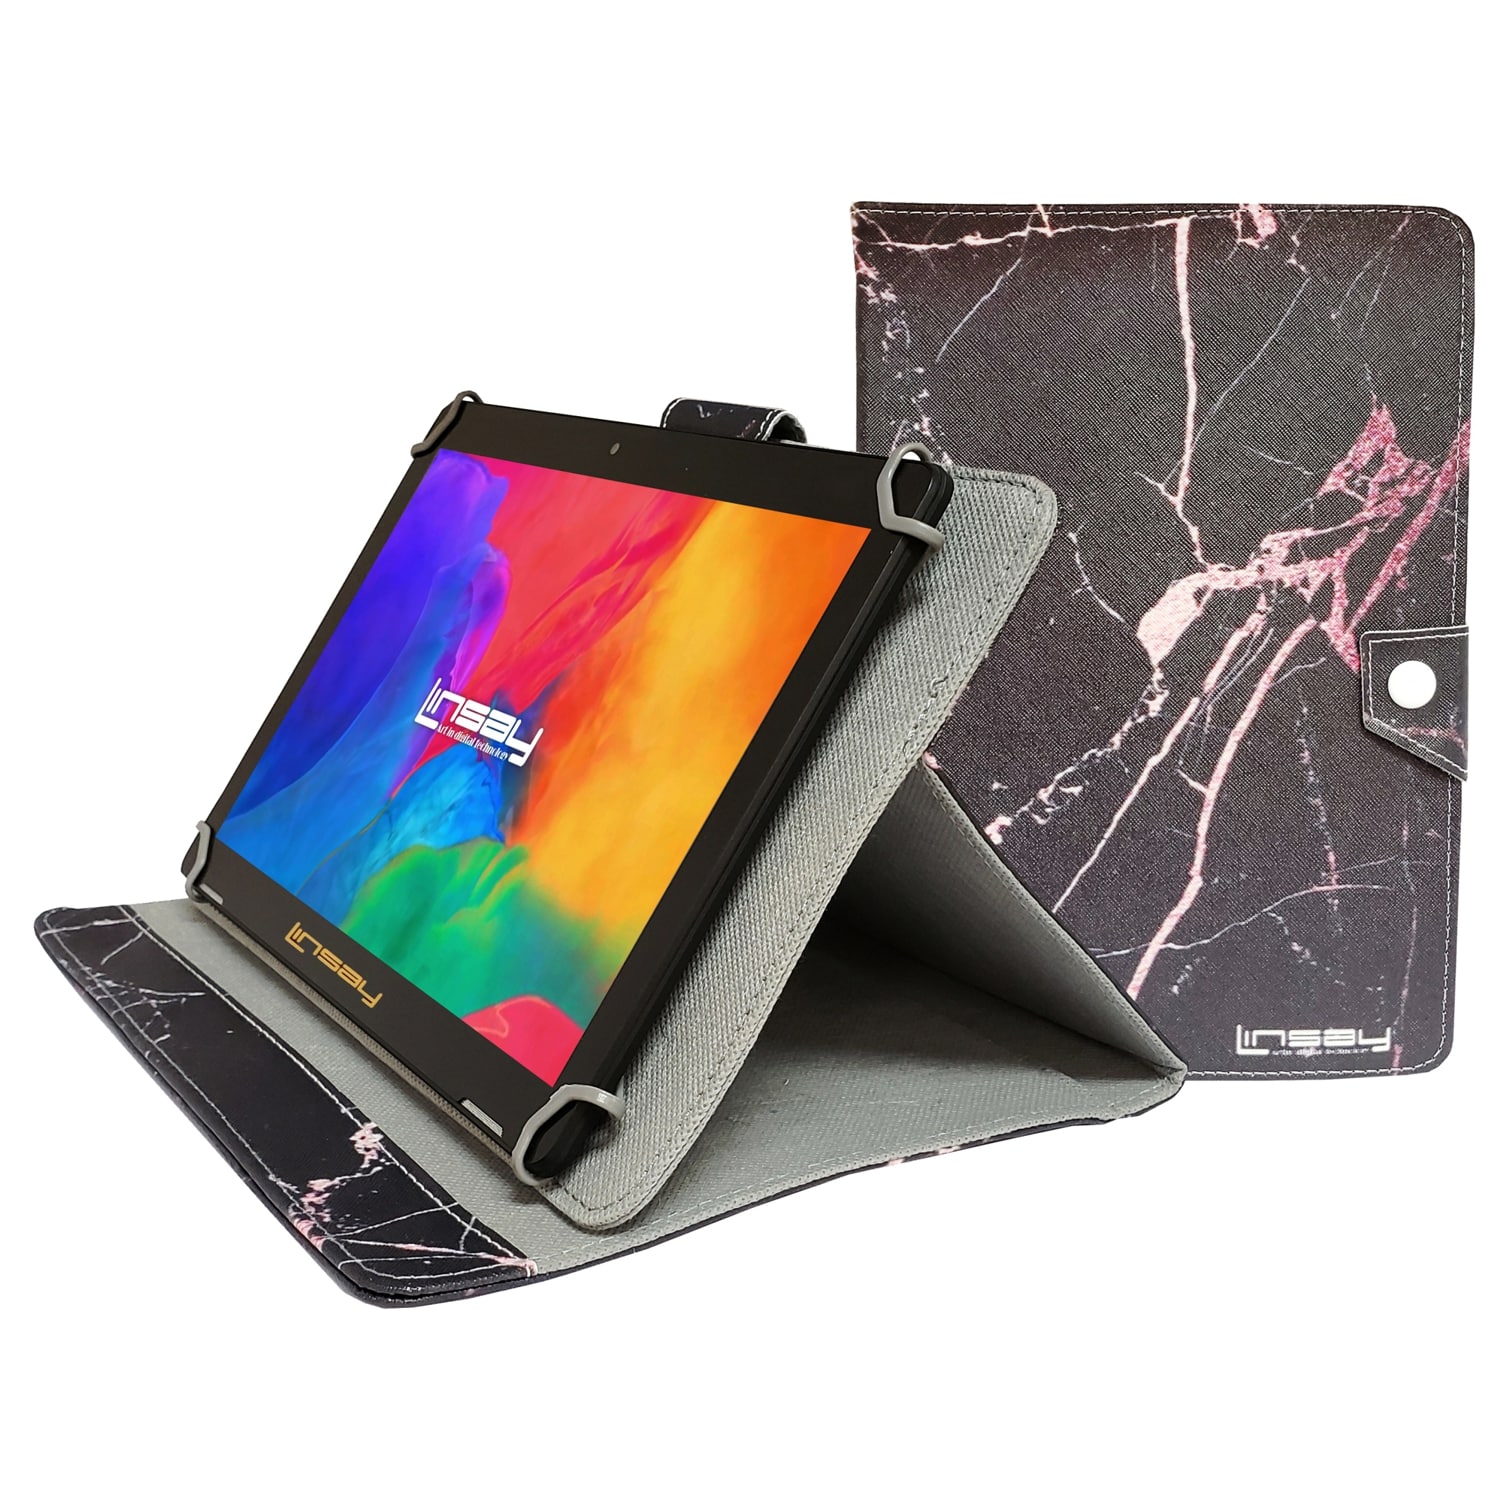 10” Tablet Keyboard and Case – Supersonic Inc